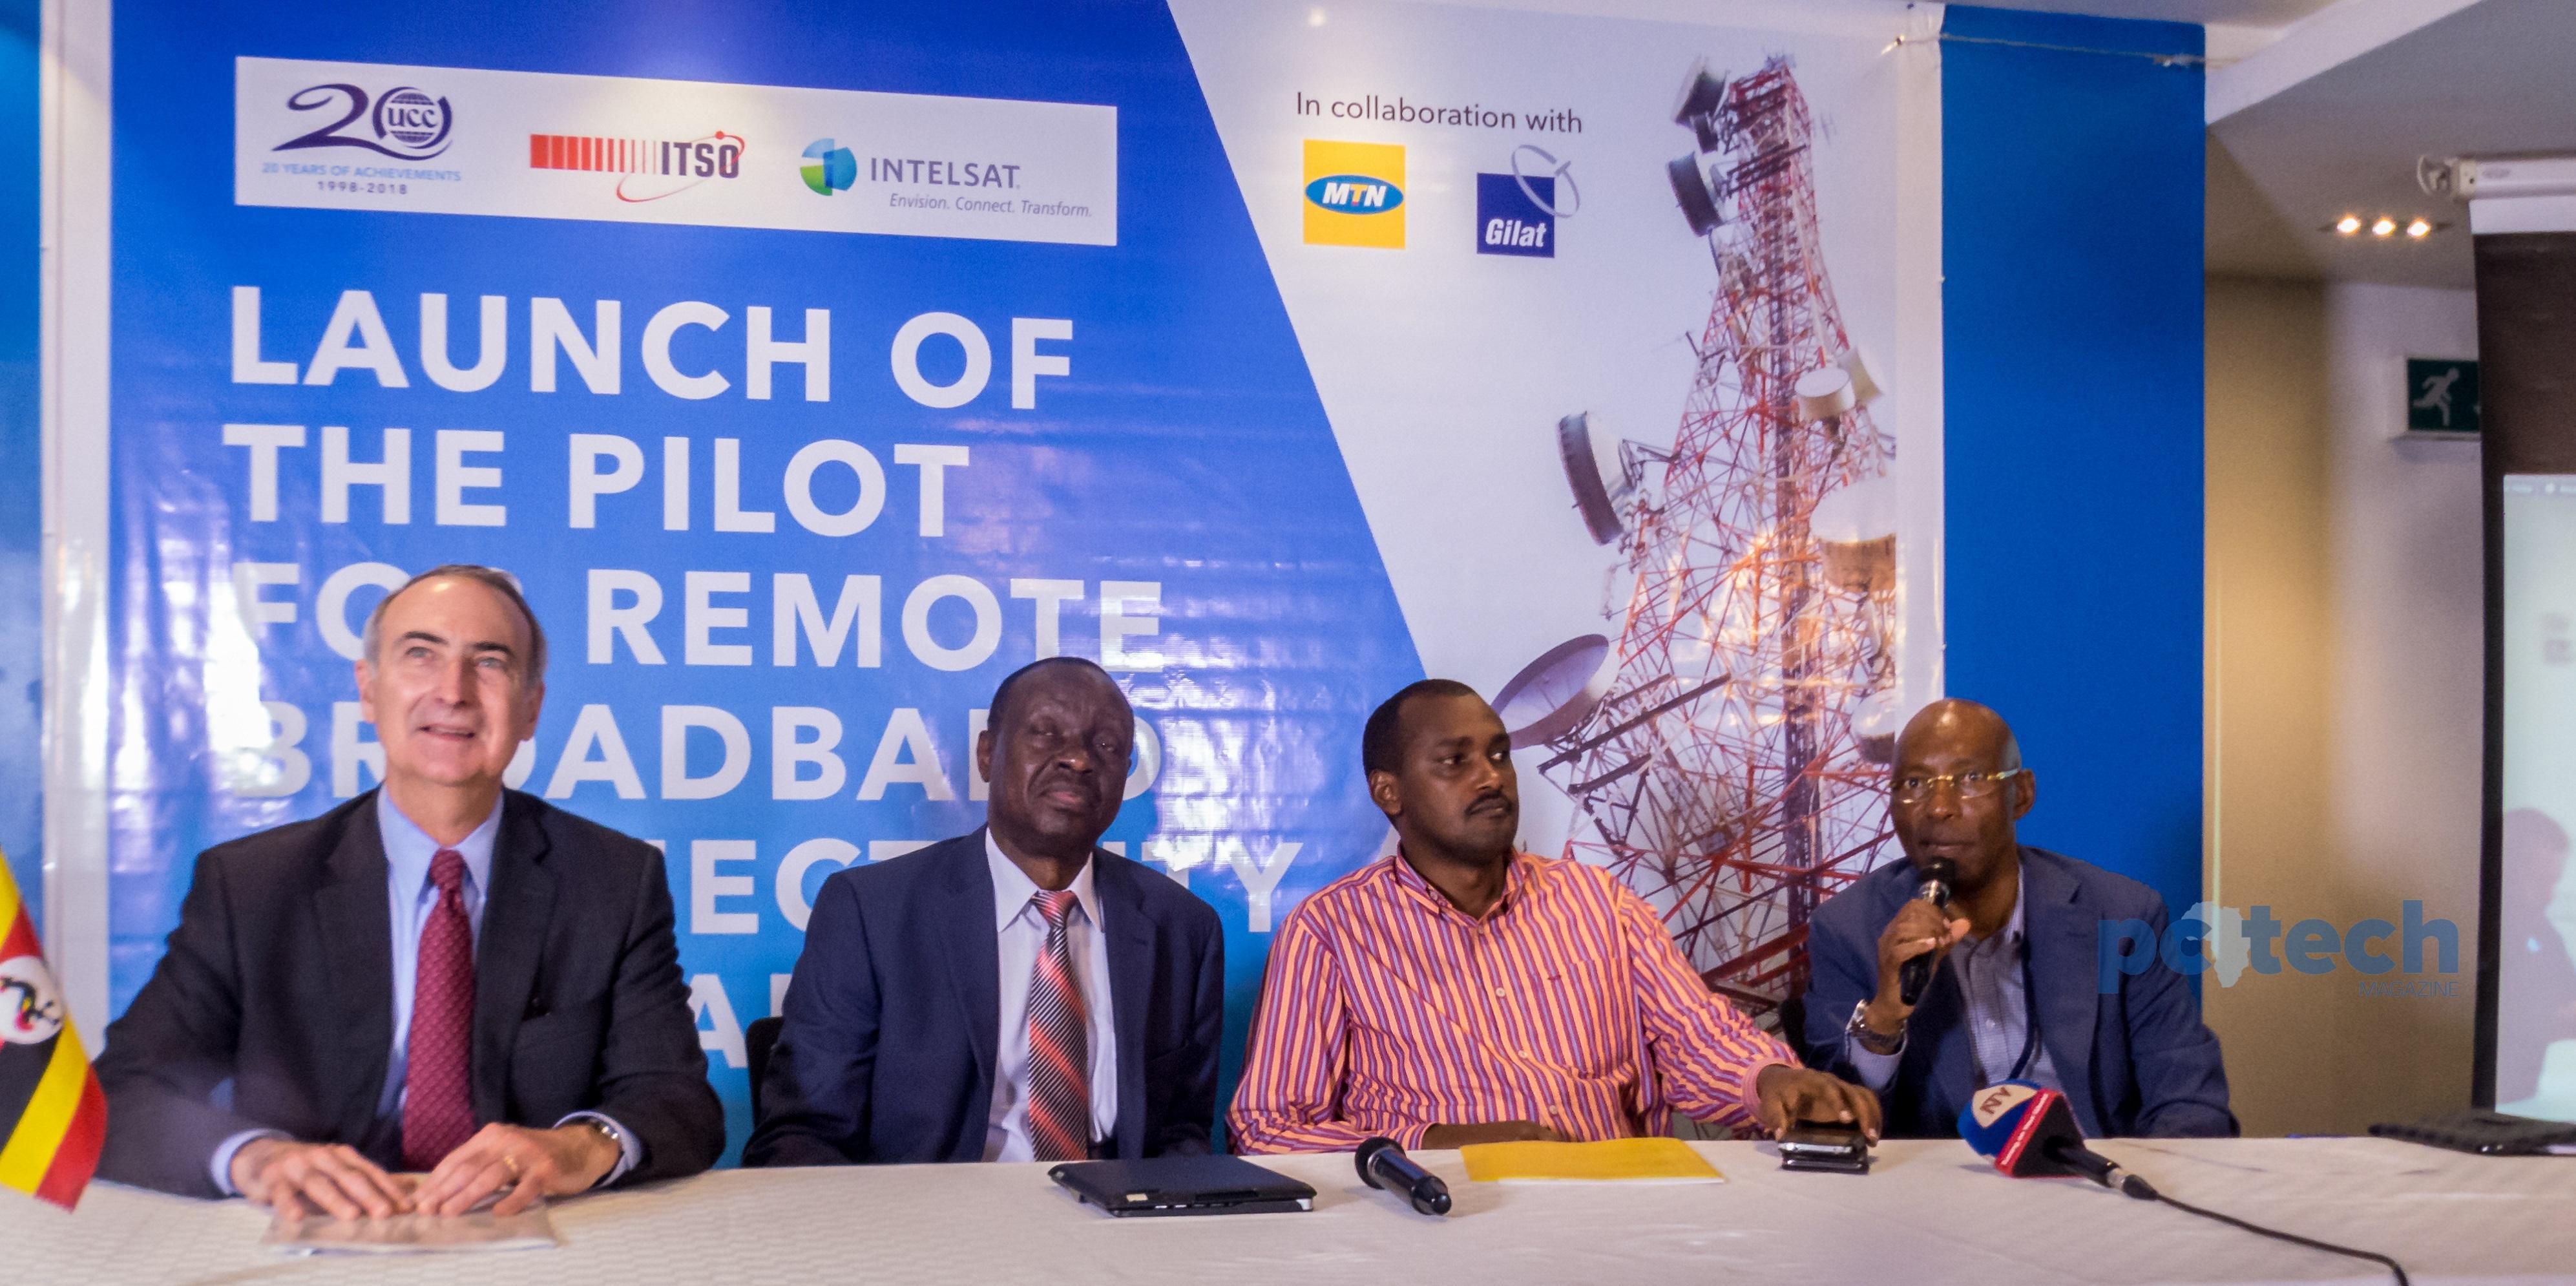 Photo of Intelsat, ITSO & MTN to Accelerate 3G Network Infrastructure Deployment in Rural Areas of Uganda